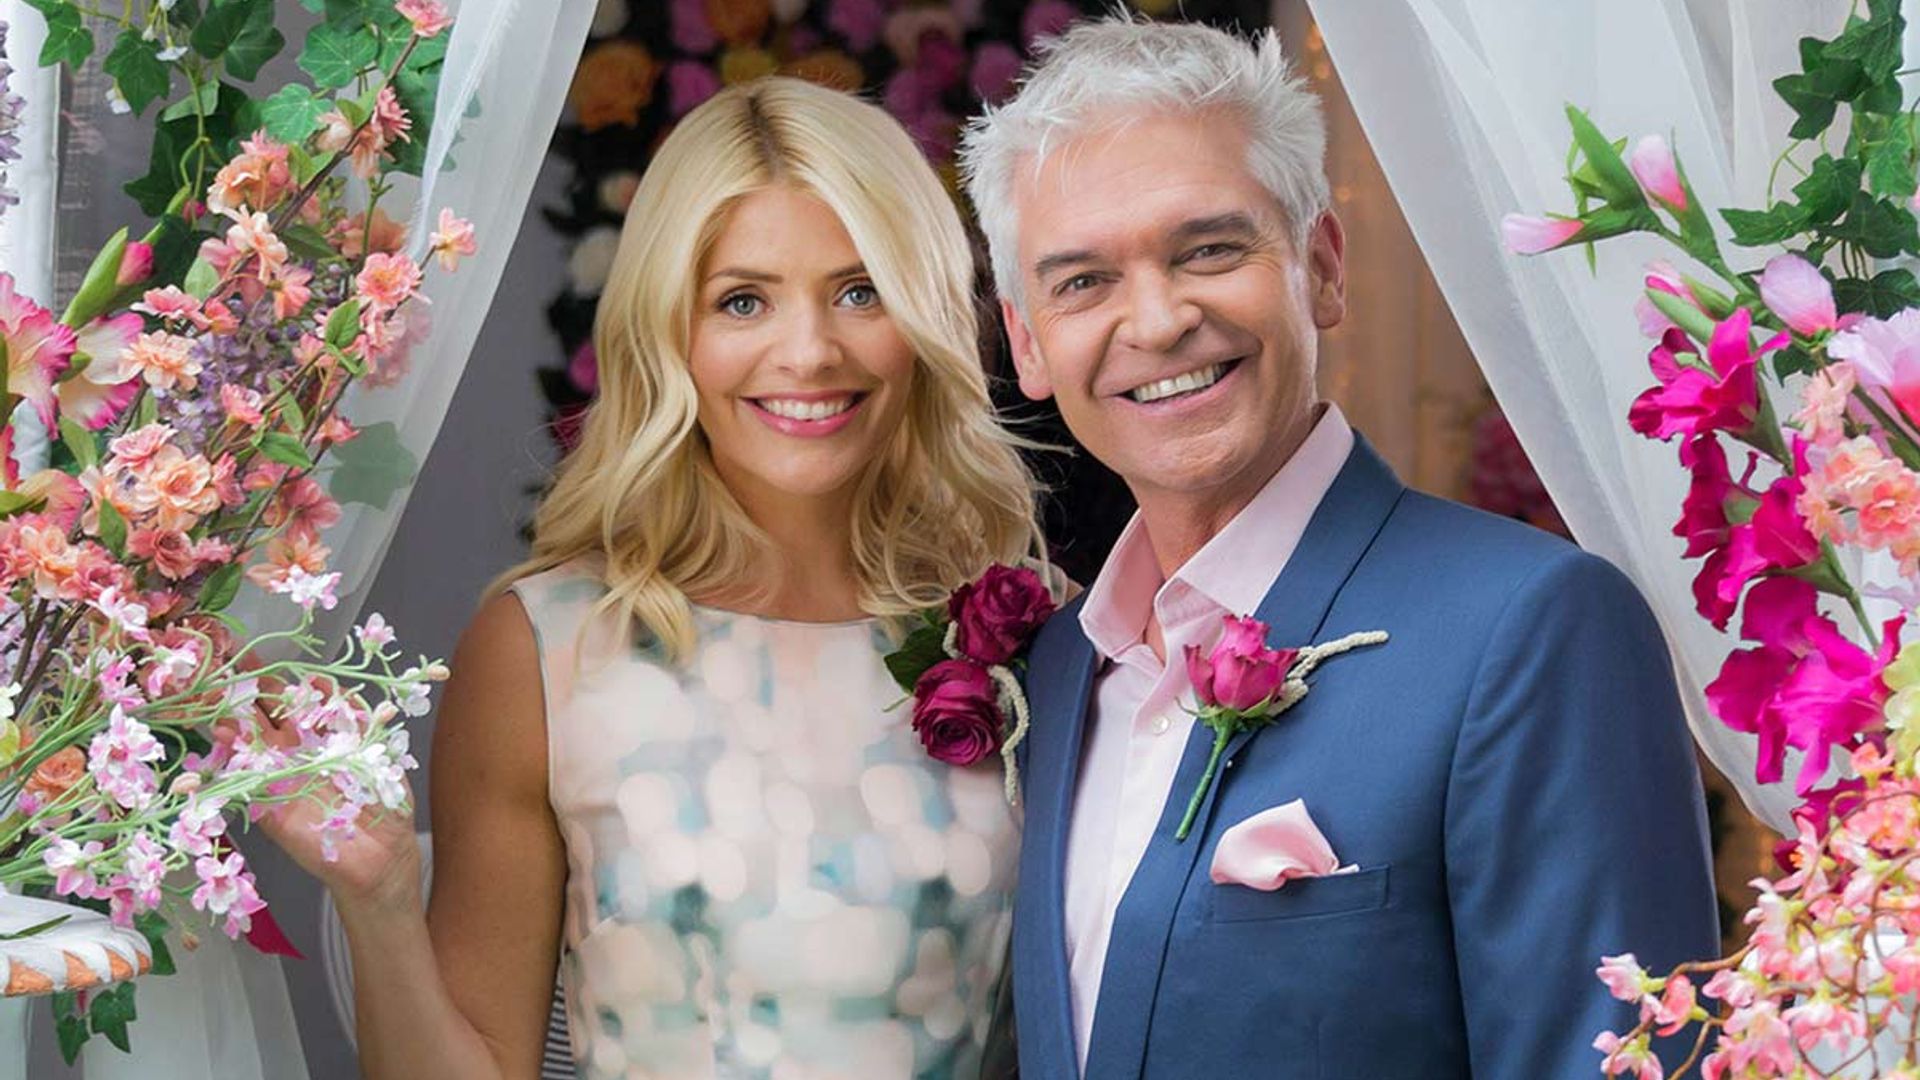 6 times Holly Willoughby gave us wedding guest style inspiration